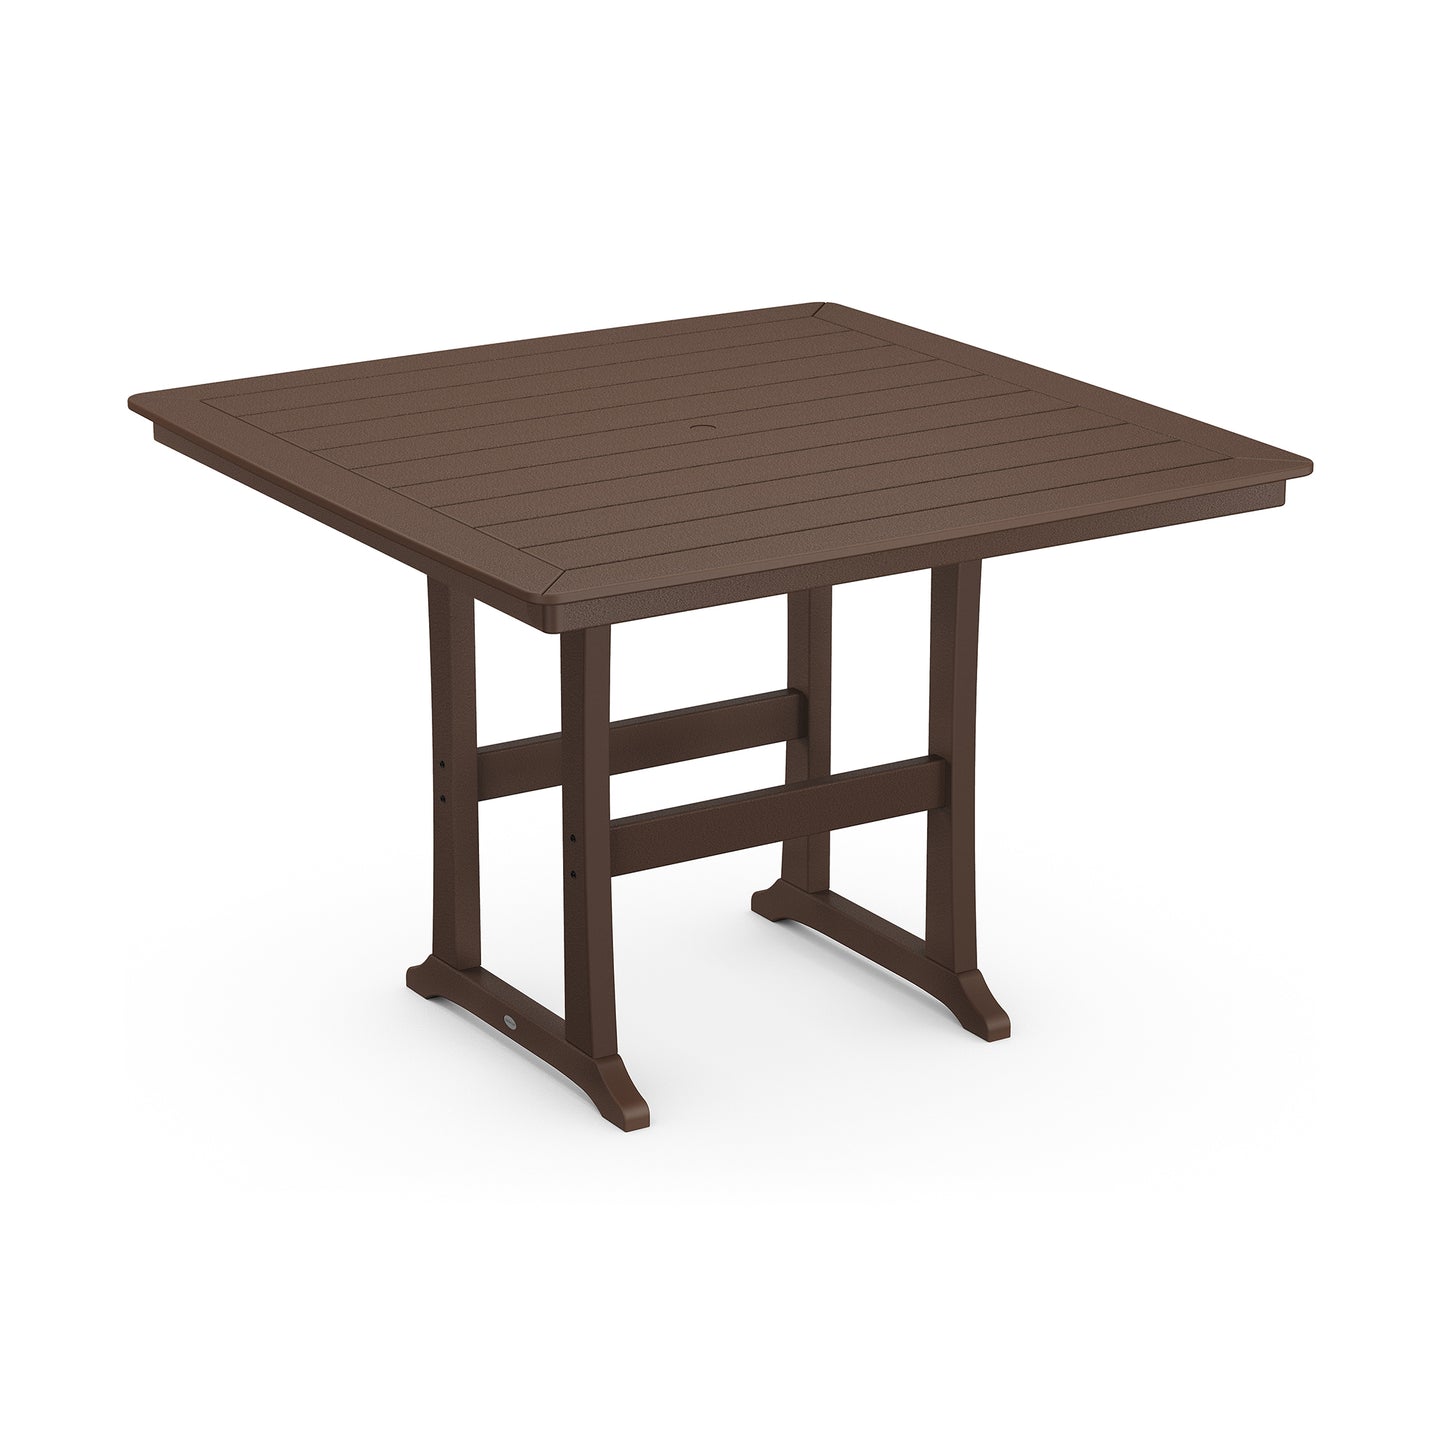 A square brown outdoor dining table made of ultra-durable POLYWOOD® material, set on a plain white background. The POLYWOOD Nautical Trestle 59" Bar Table features a slatted top and sturdy legs.